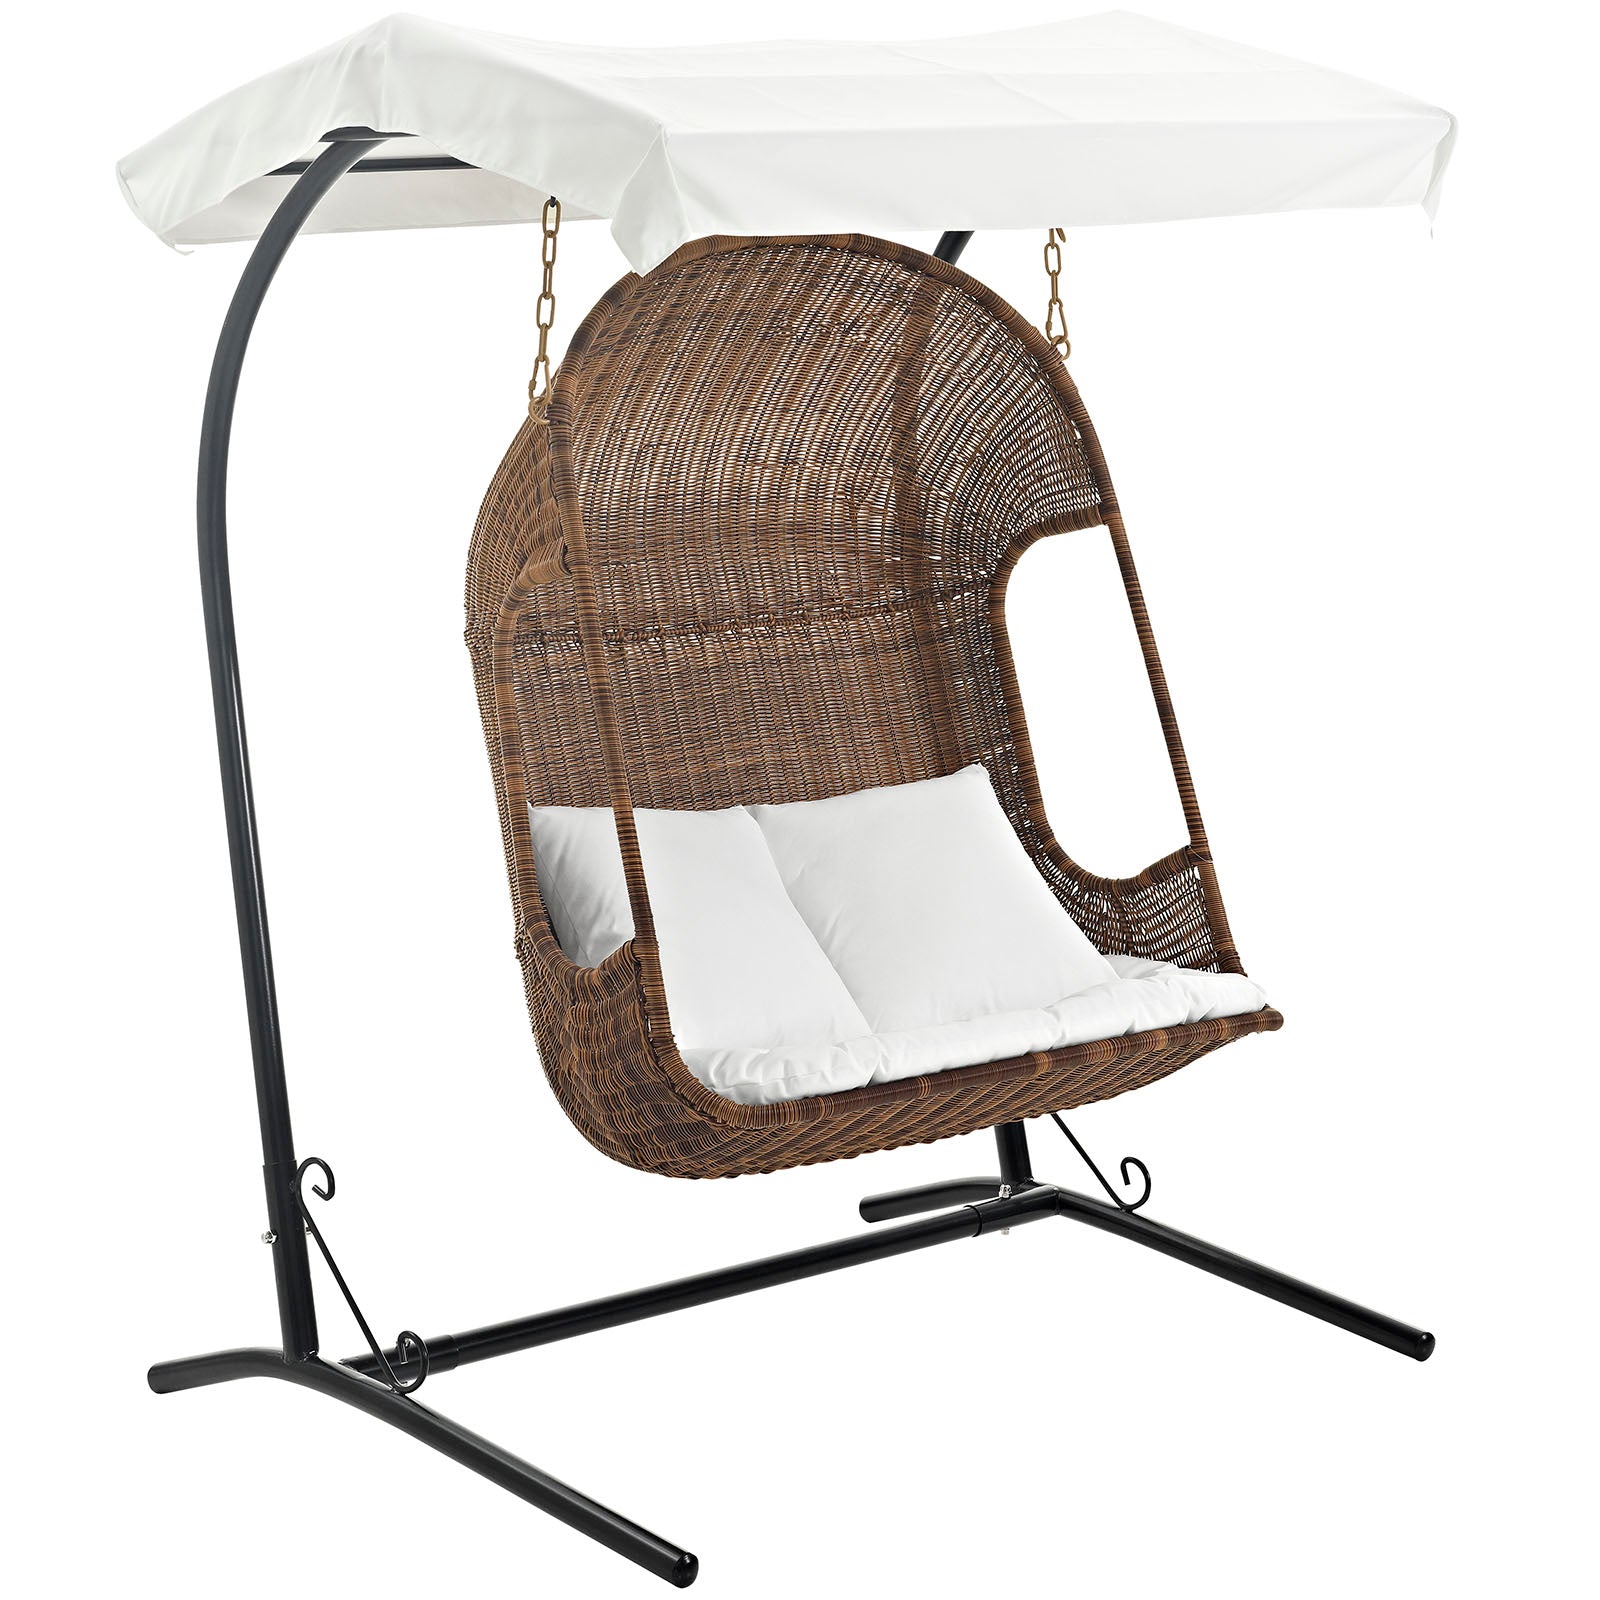 Vantage Outdoor Patio Swing Chair With Stand